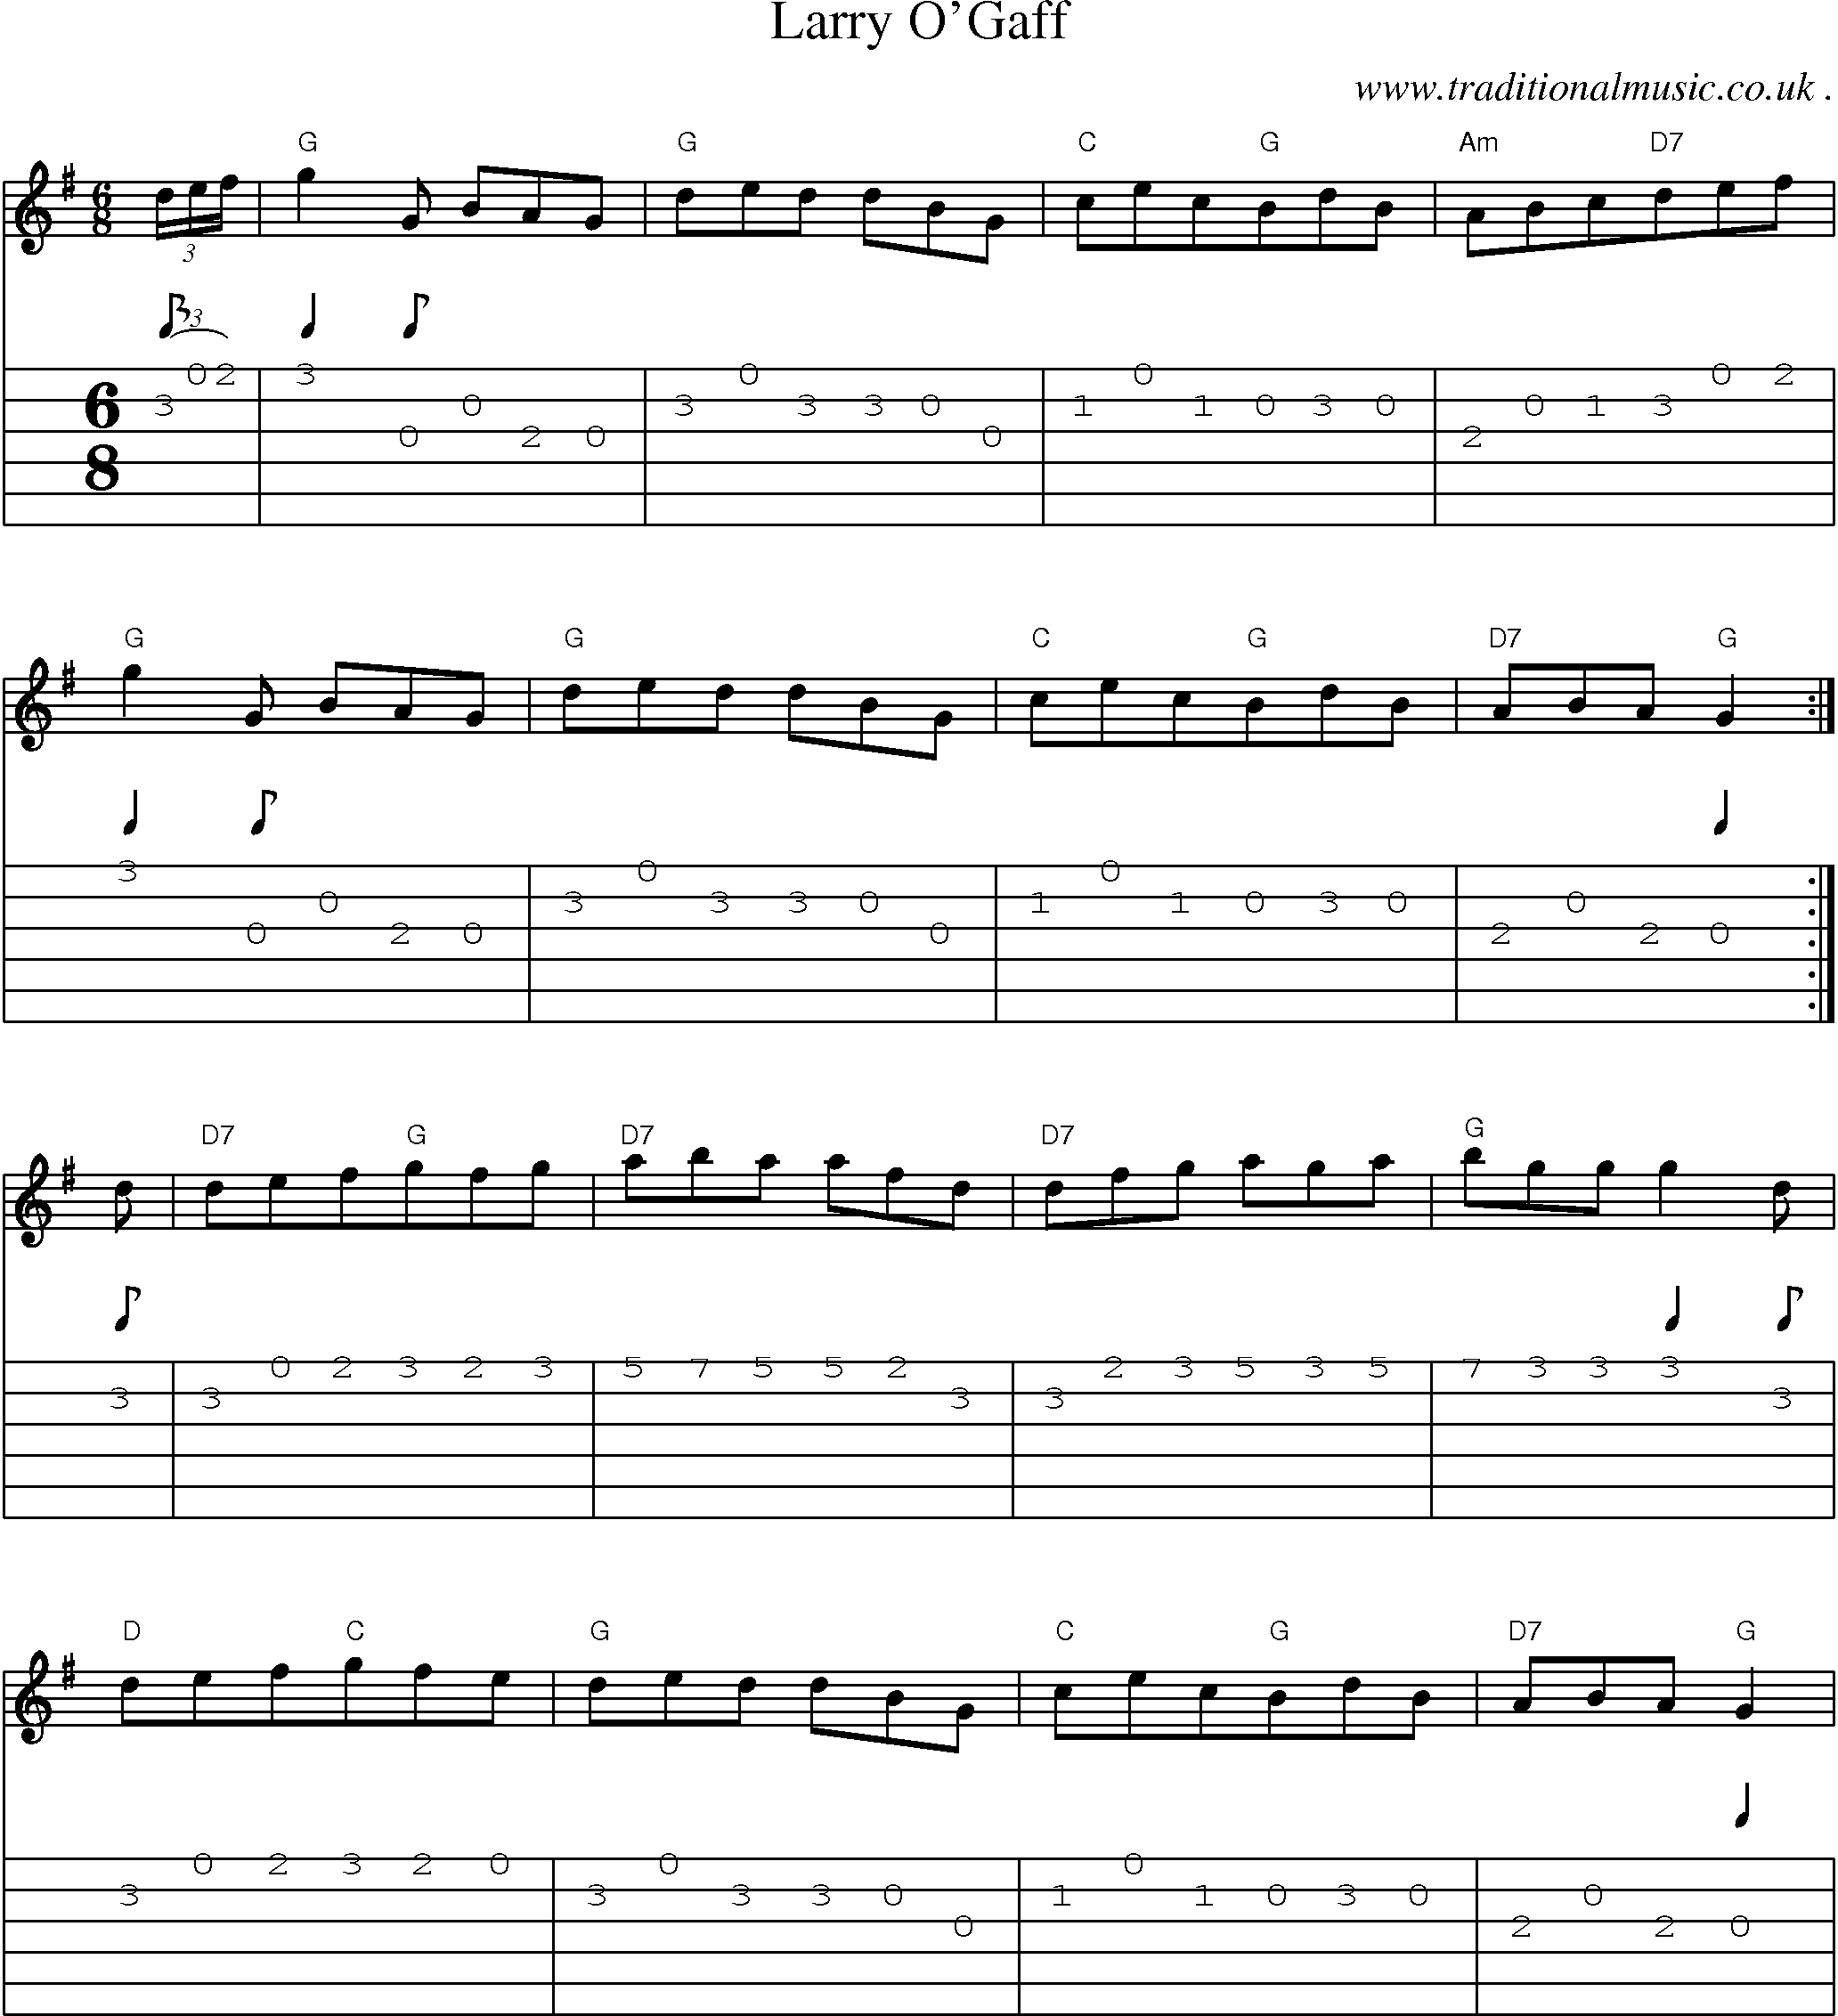 Sheet-Music and Guitar Tabs for Larry Ogaff